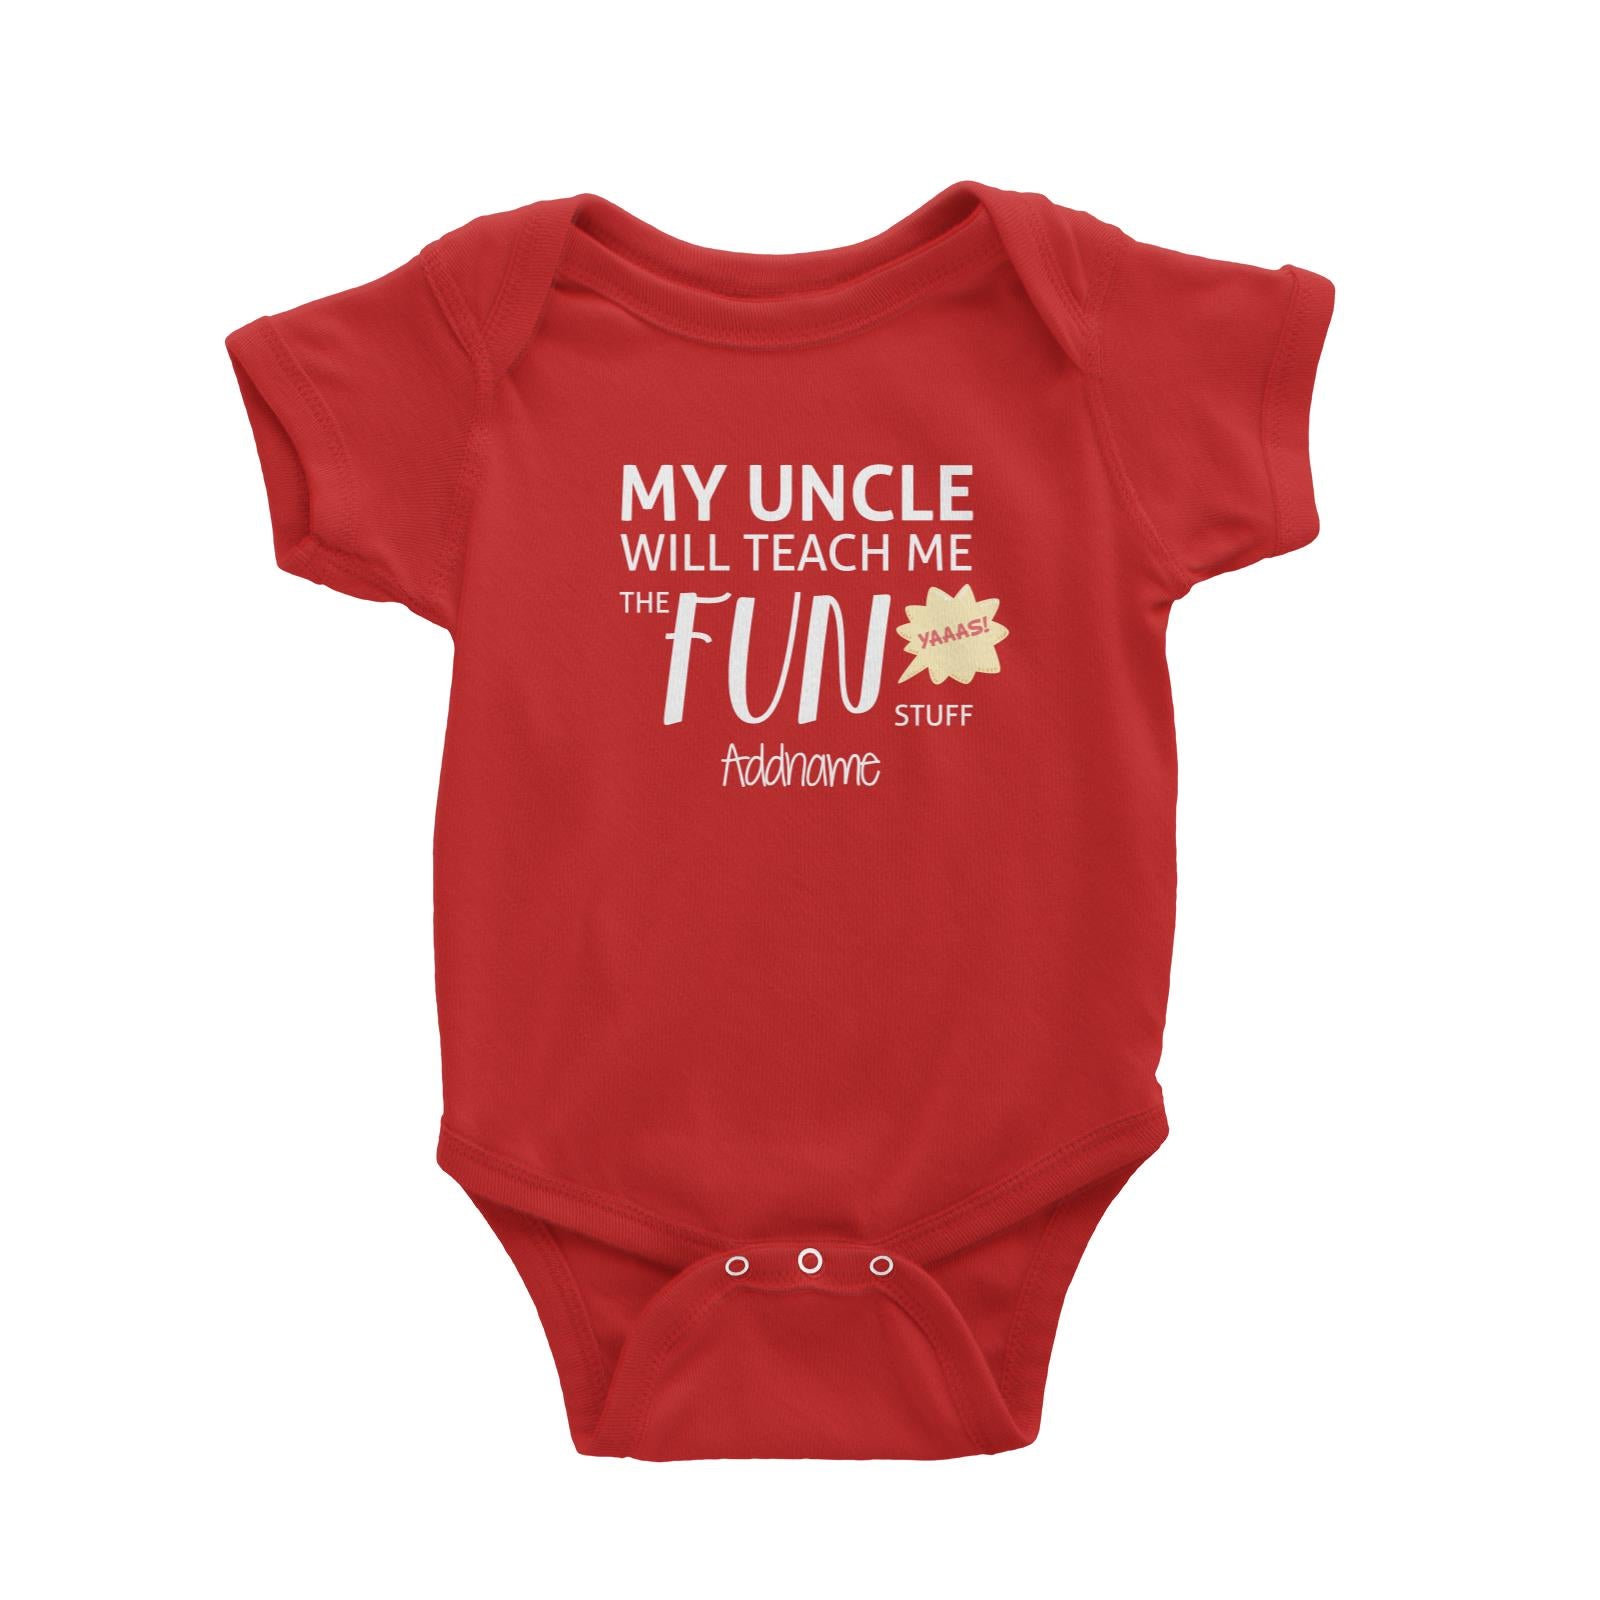 My Uncle Will Teach Me The Fun Stuff Addname Baby Romper